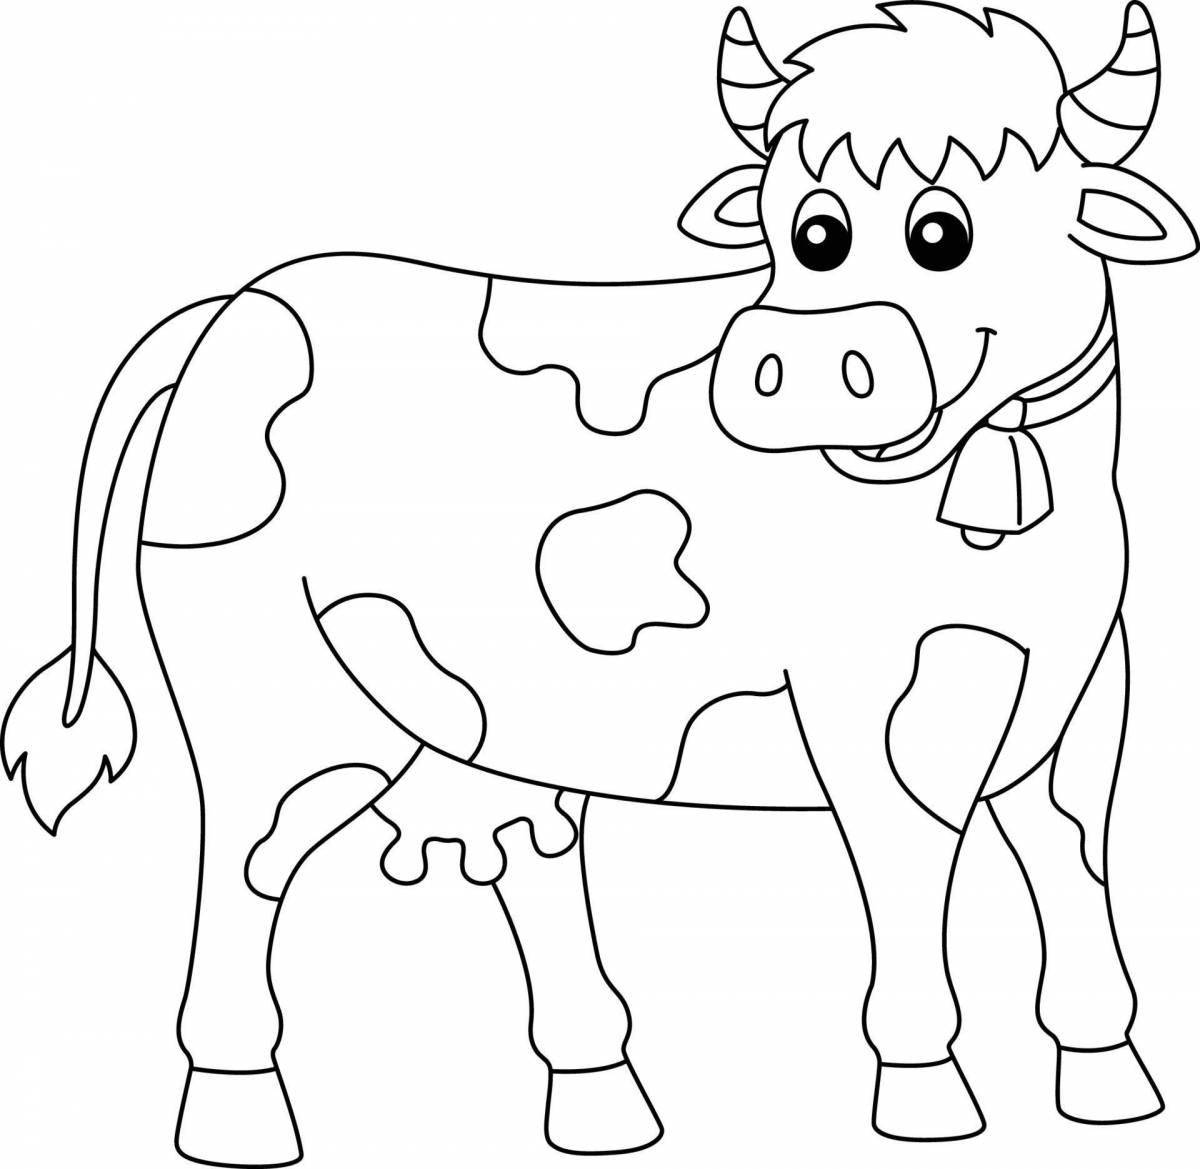 Adorable cow and calf coloring page